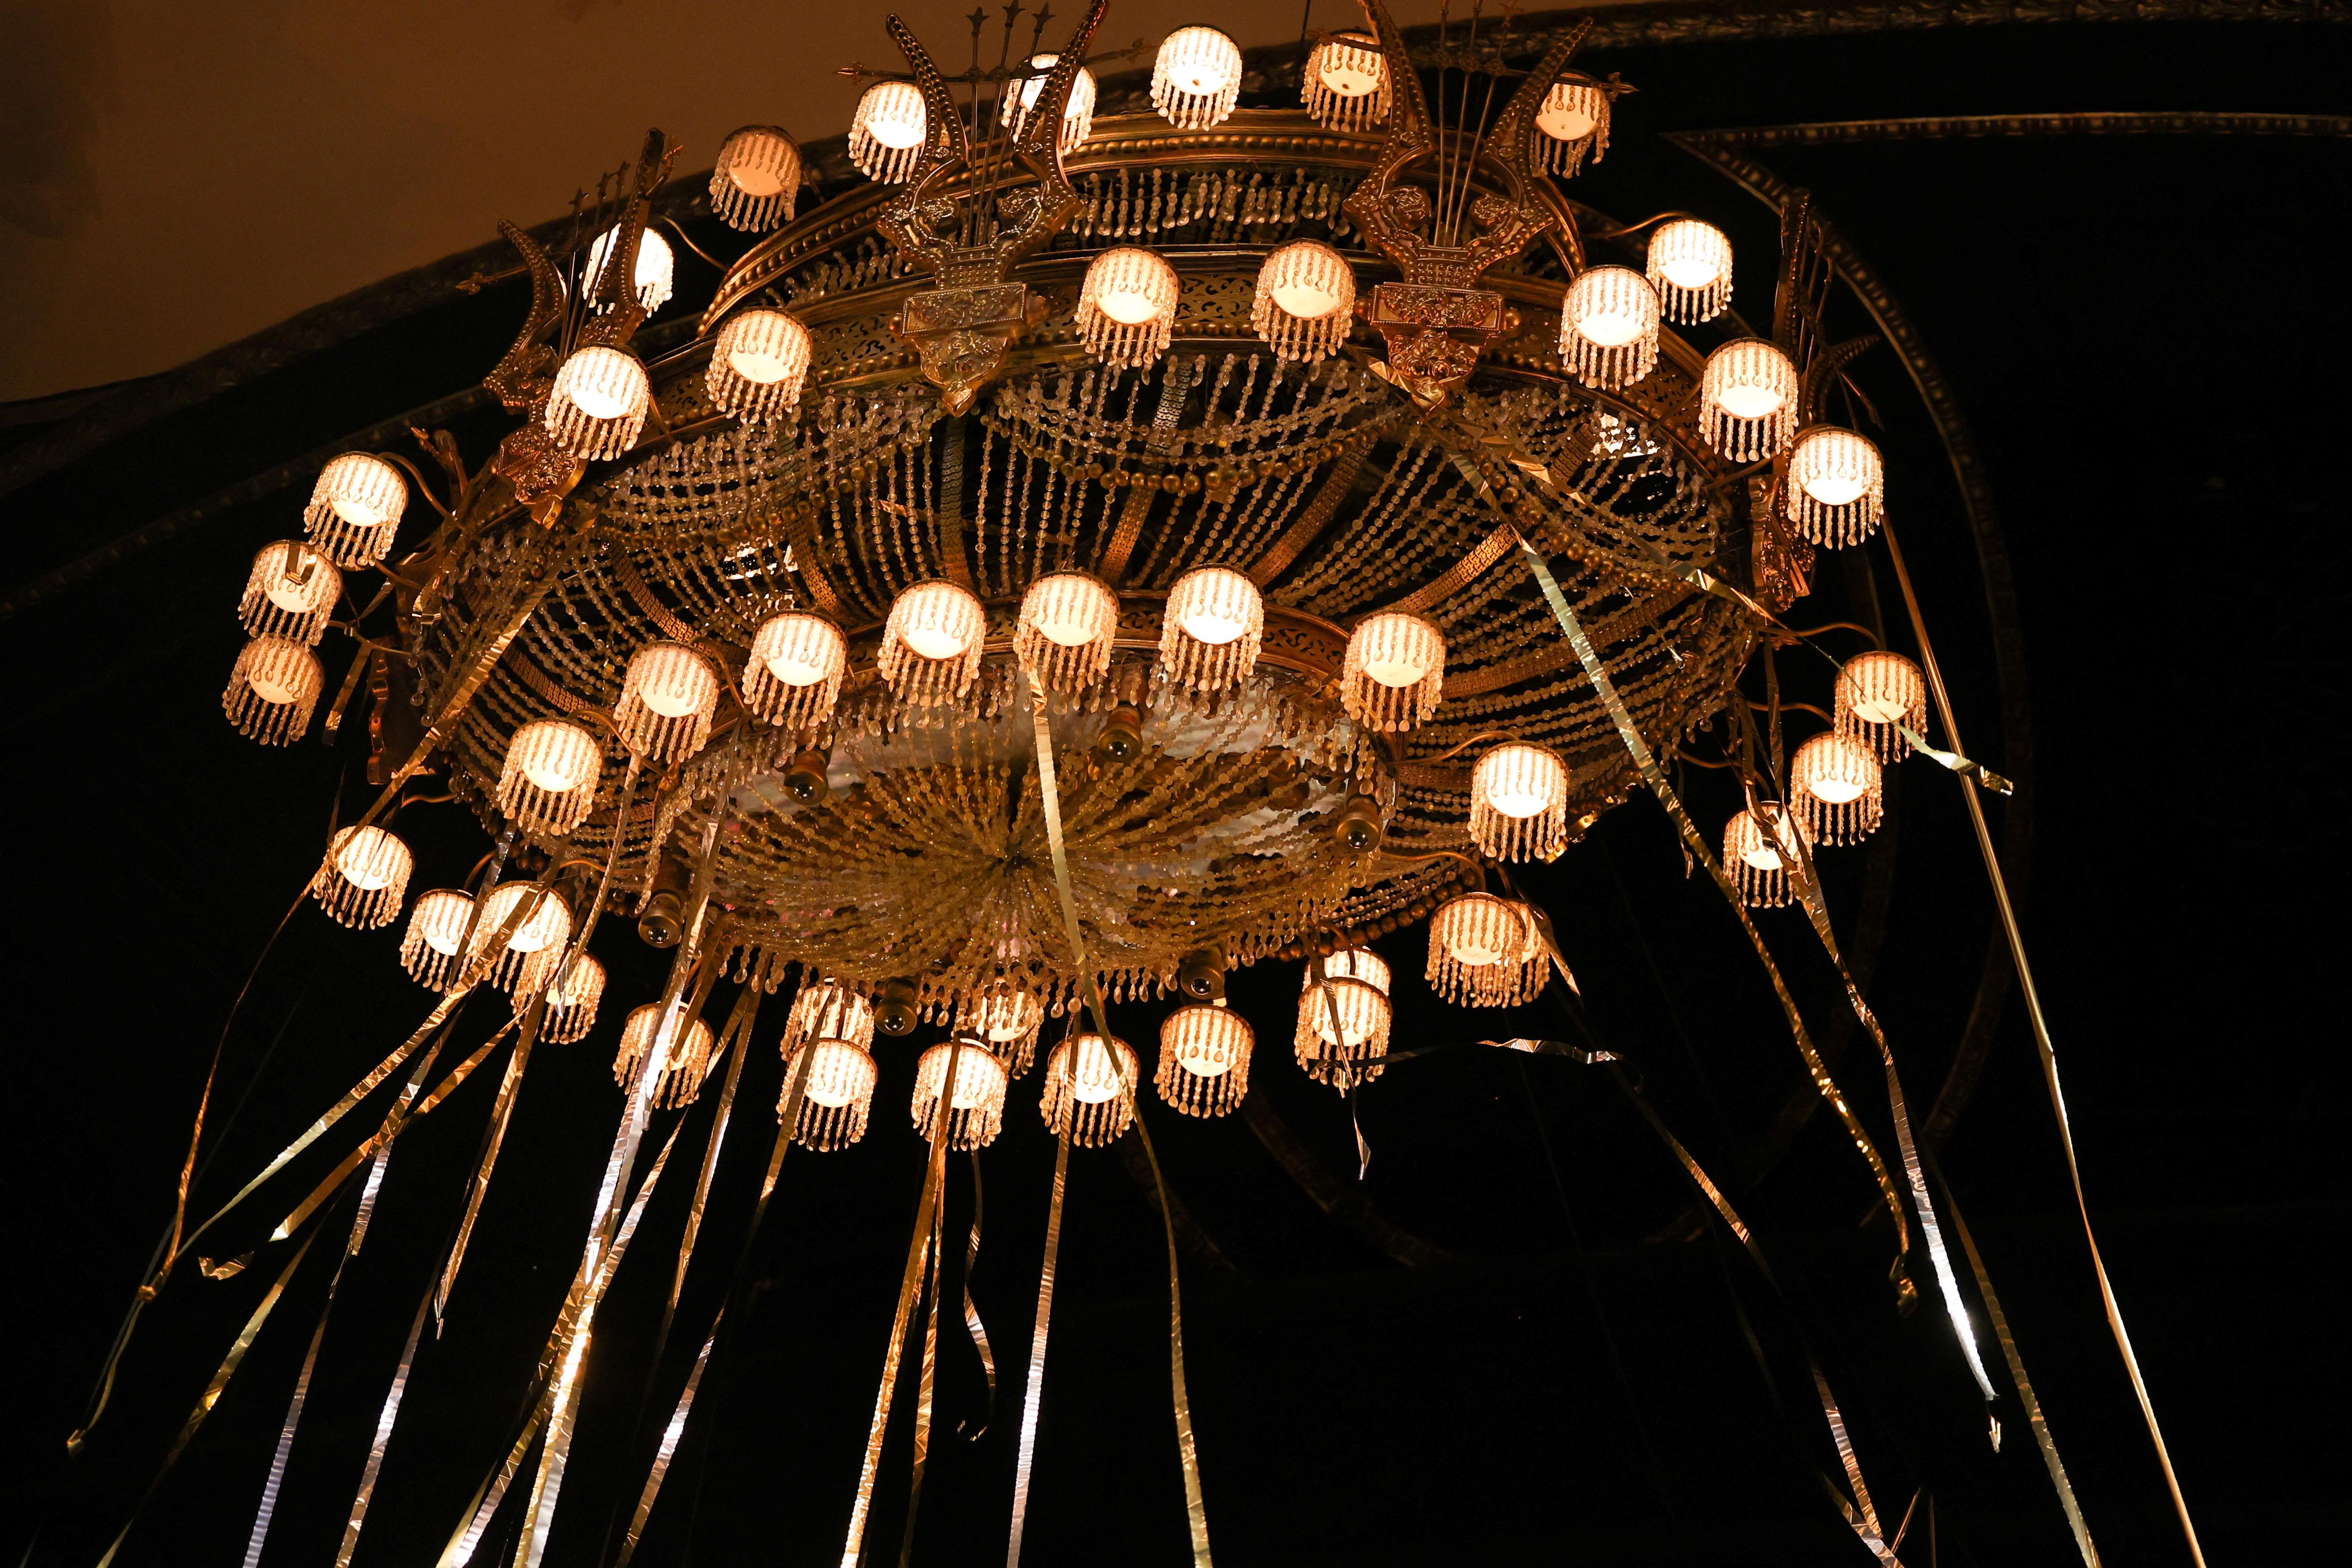 The legendary chandelier from The Phantom of the Opera was lit for the last time on Broadway.  (PHOTO: REUTERS/Caitlin Ochs)